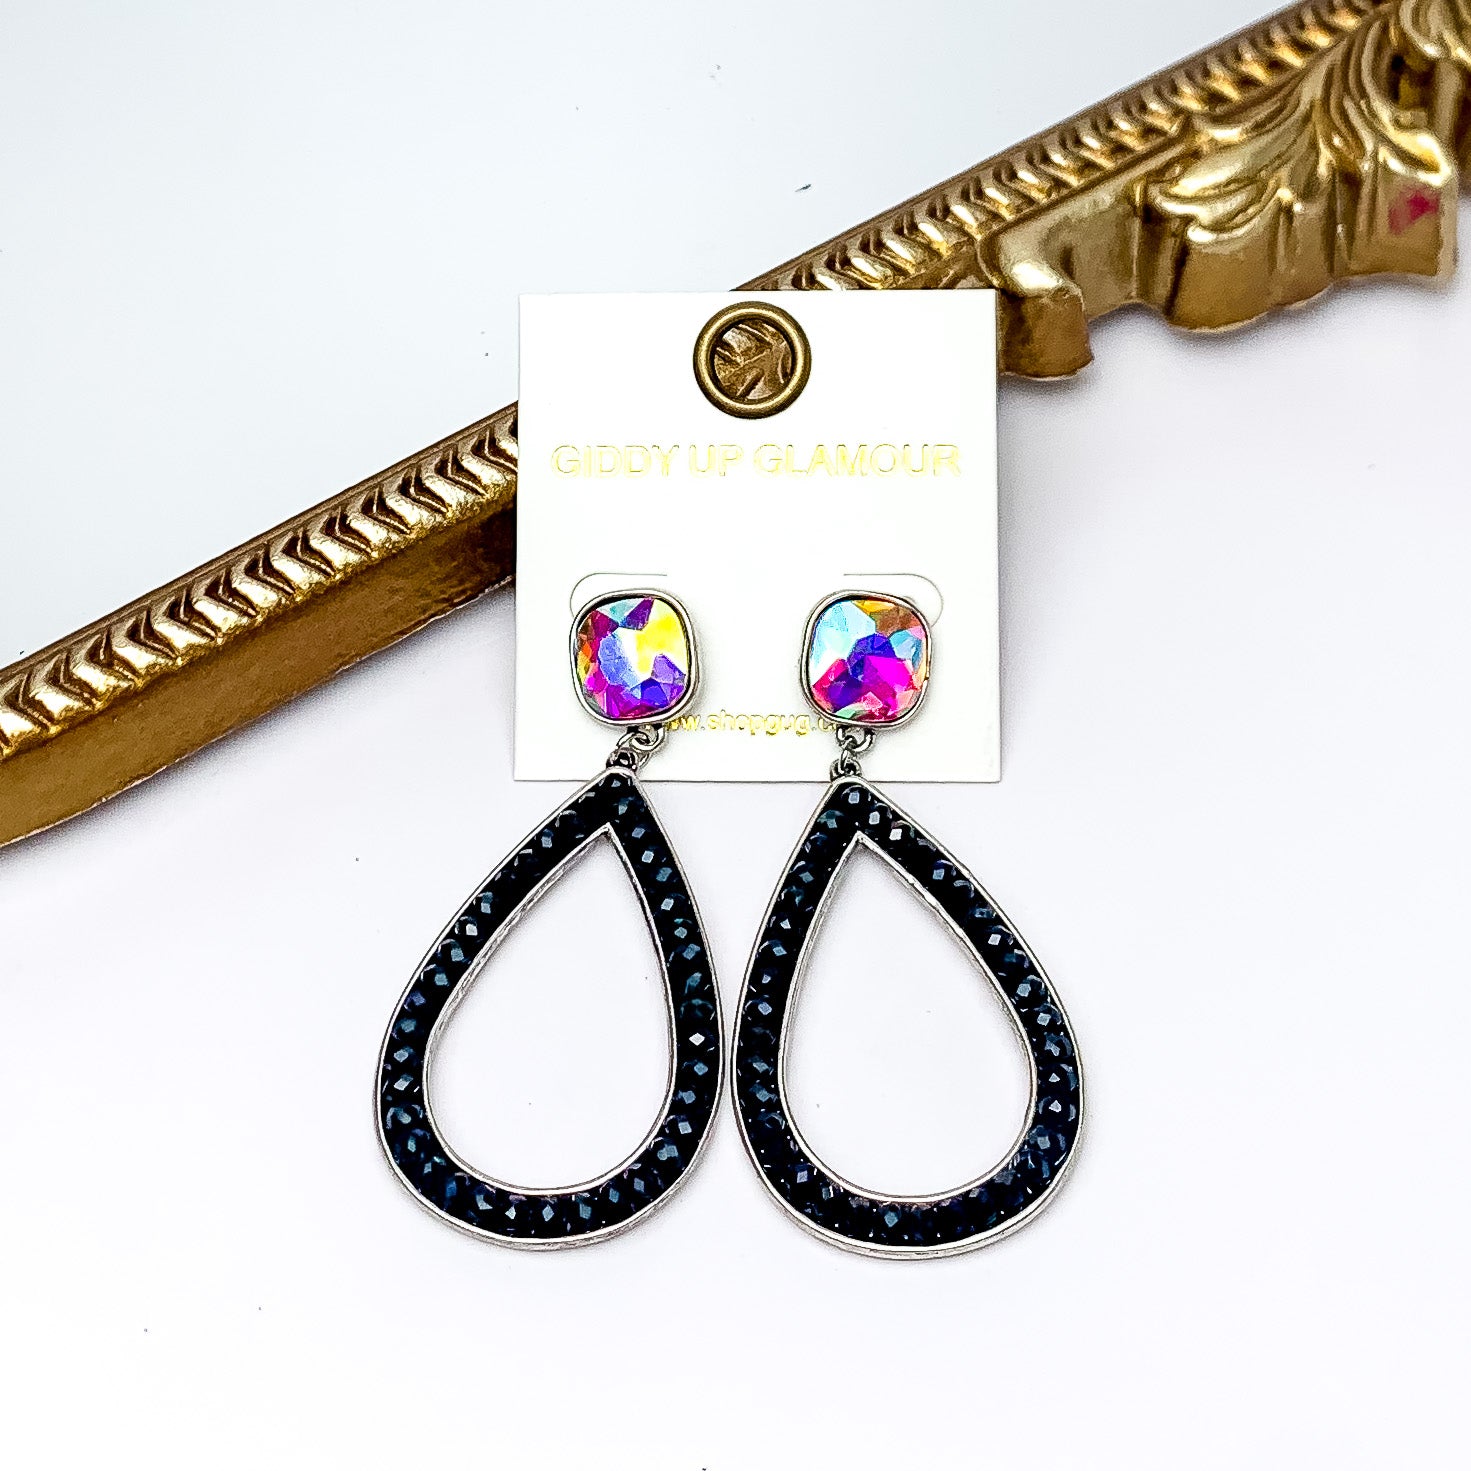 Glass Beaded Teardrop Post Earrings with AB Crystal in Black. Pictured on a white background with a gold frame behind the earrings.